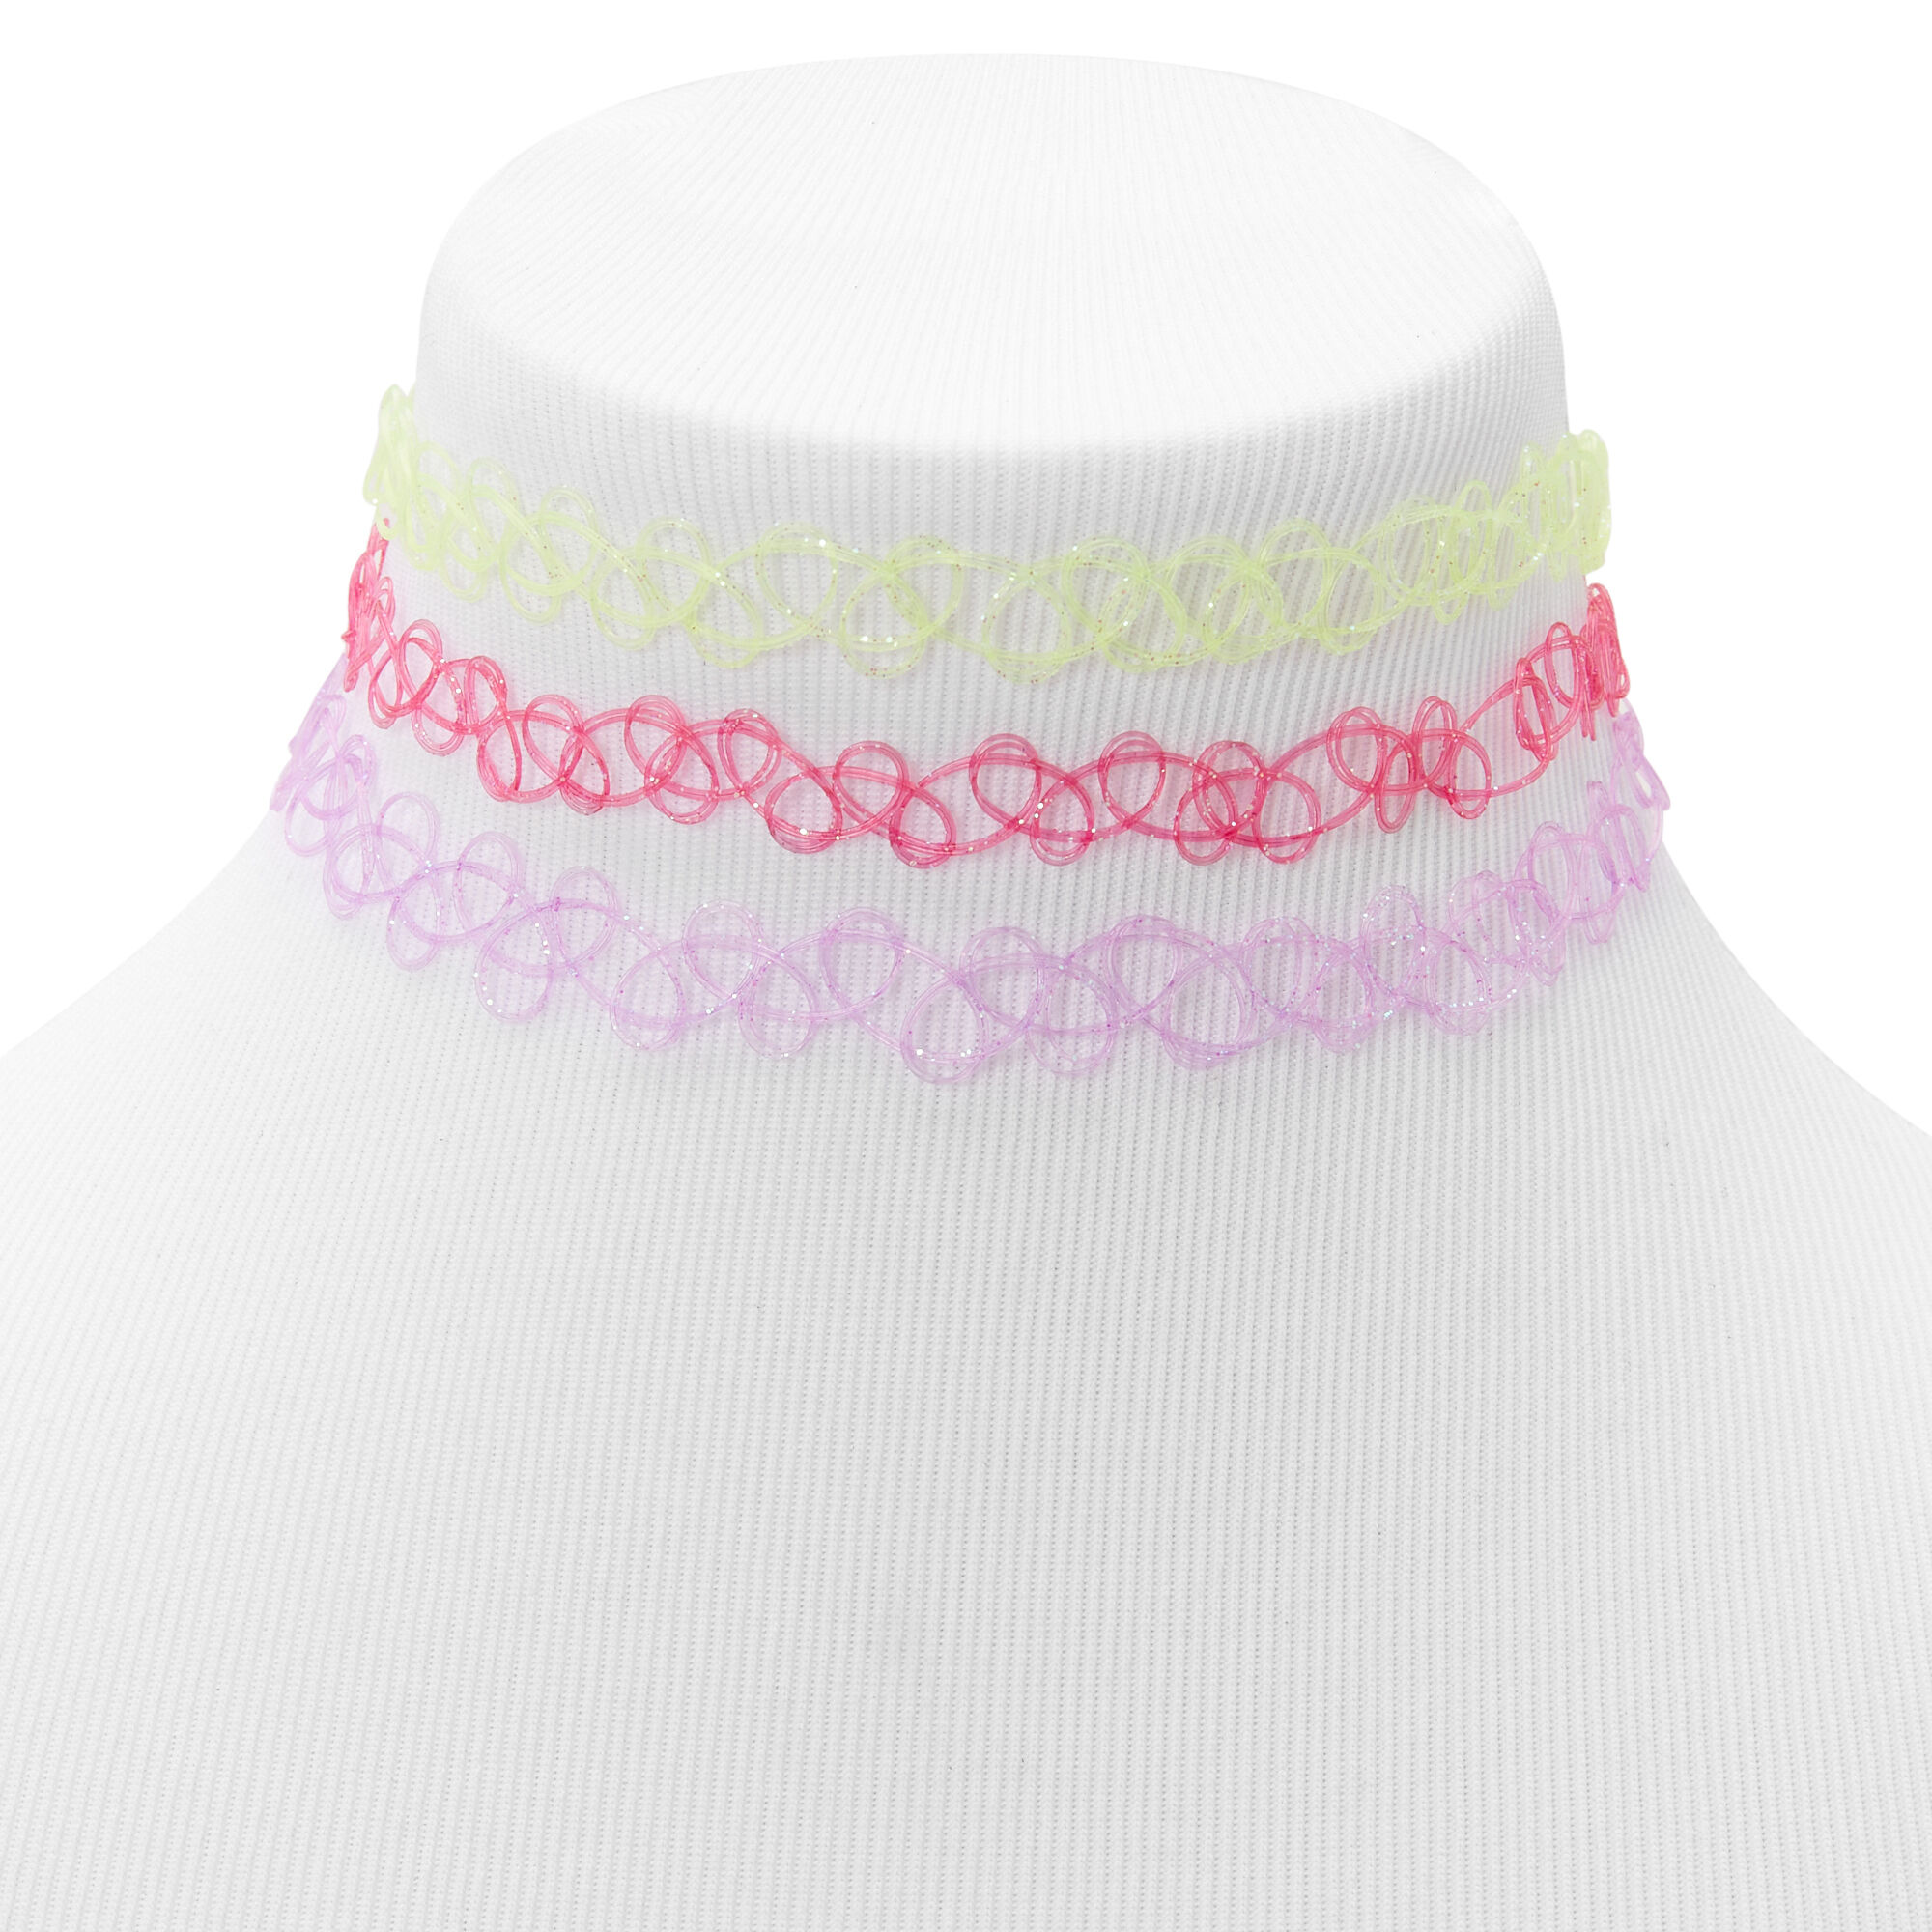 Glitter Choker Necklaces - 3 Pack |